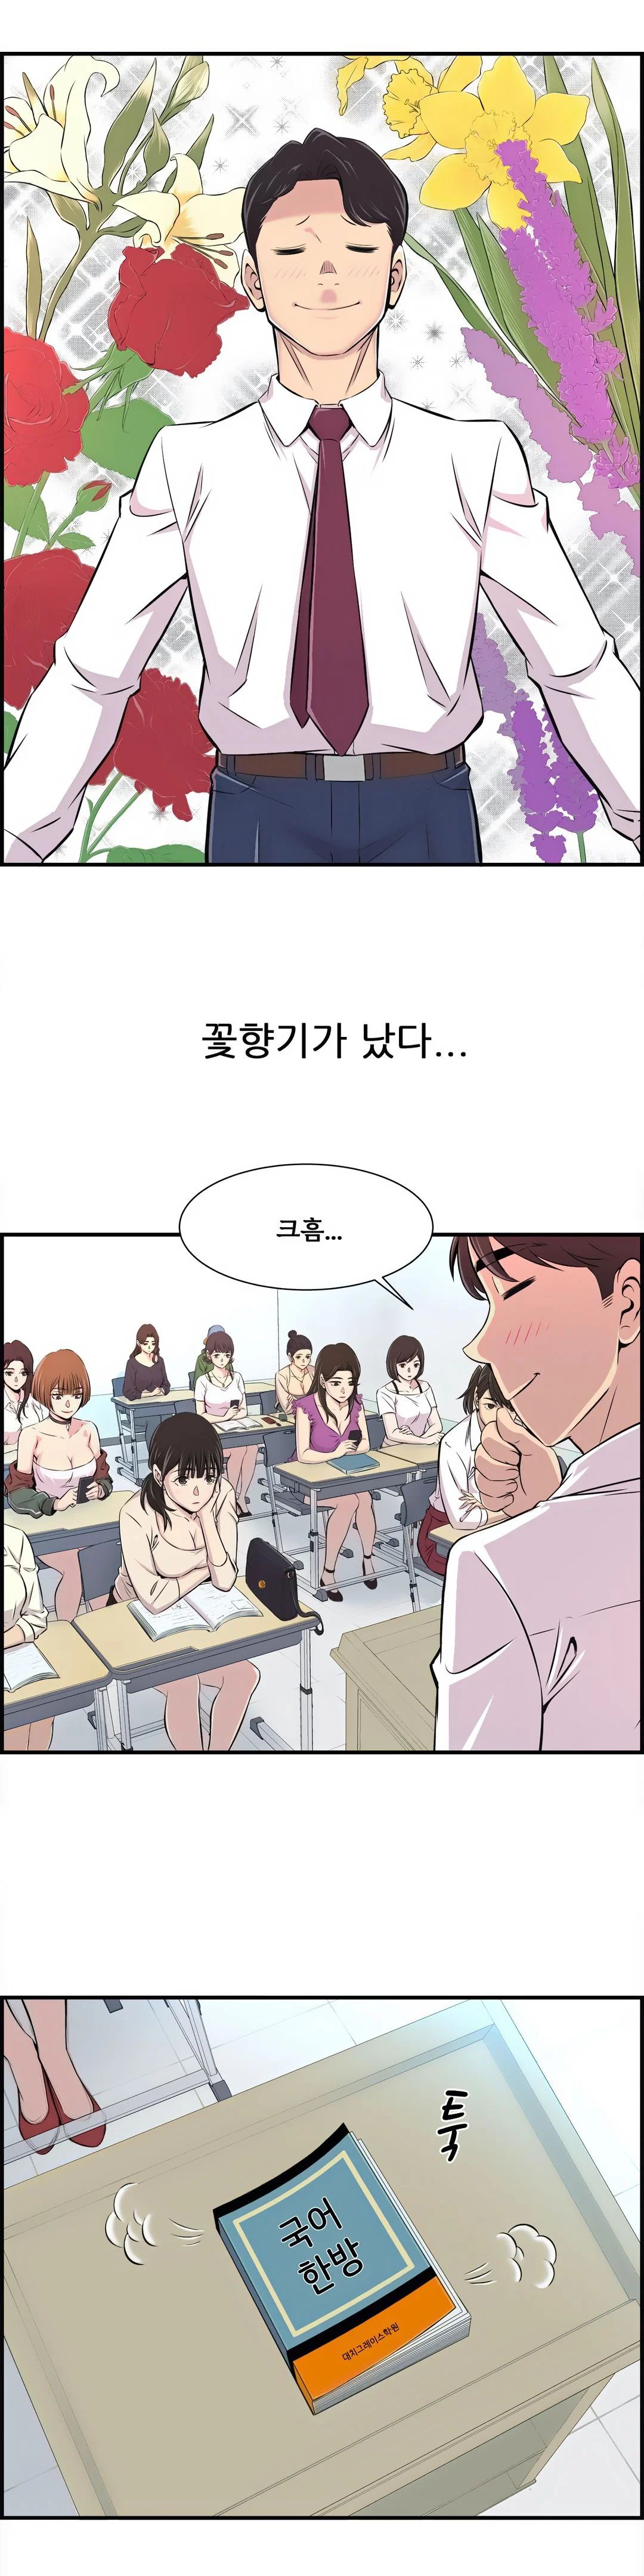 Cram School Scandal Raw - Chapter 1 Page 28